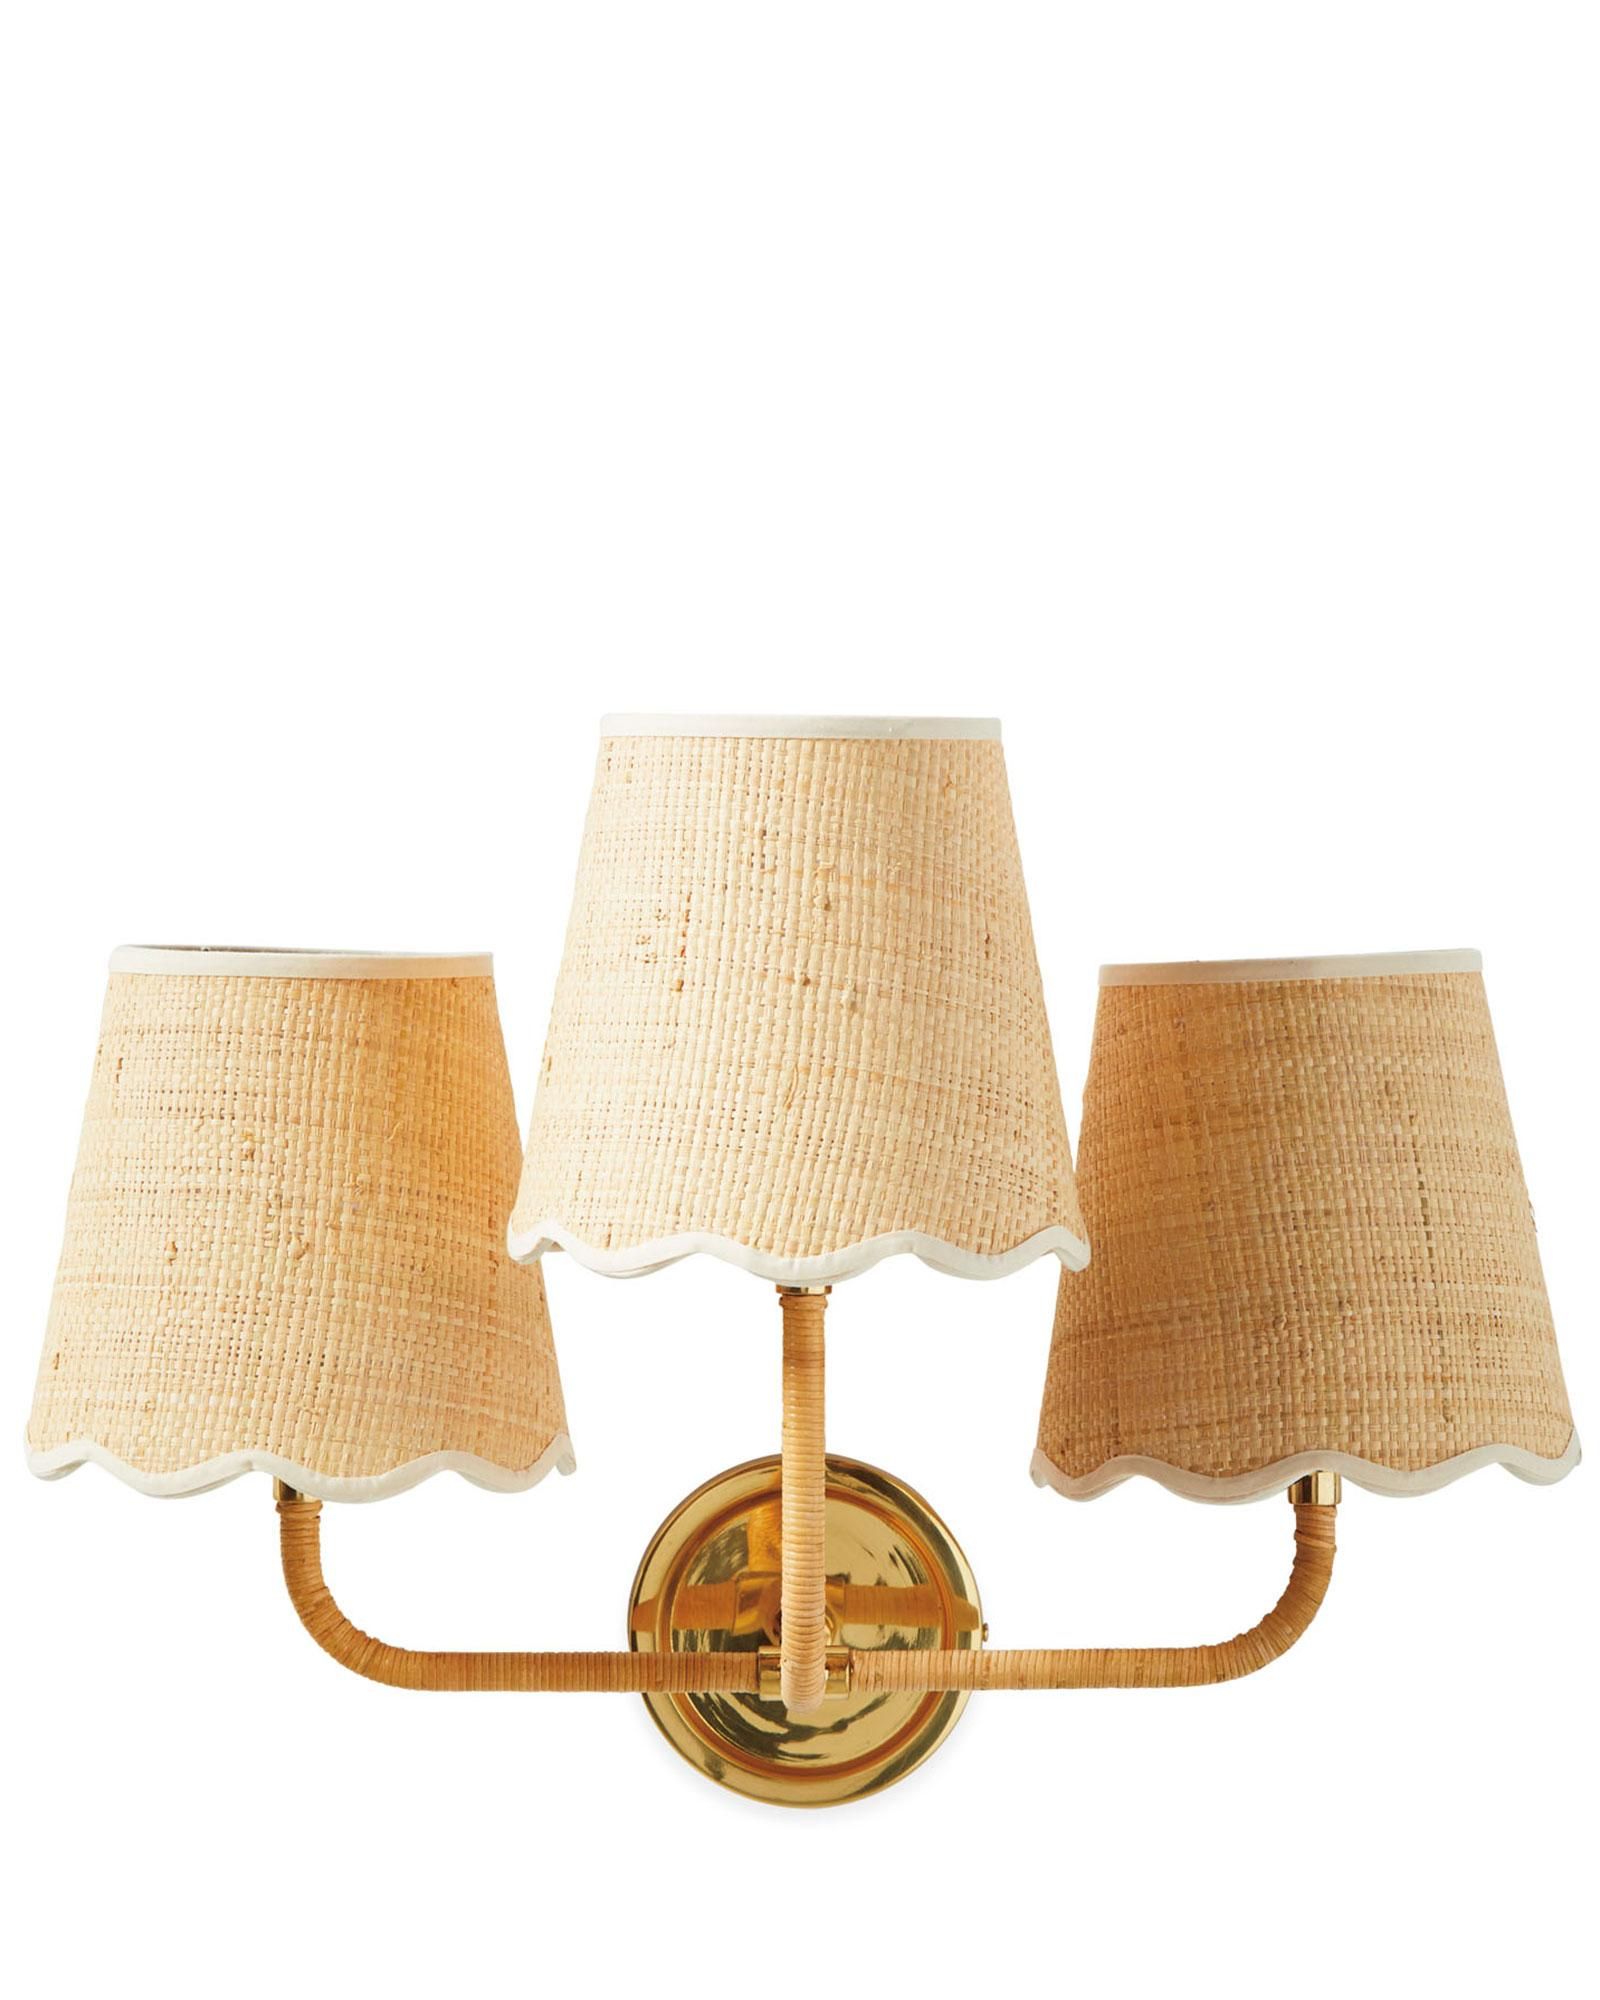 Larkspur Triple Sconce | Serena and Lily